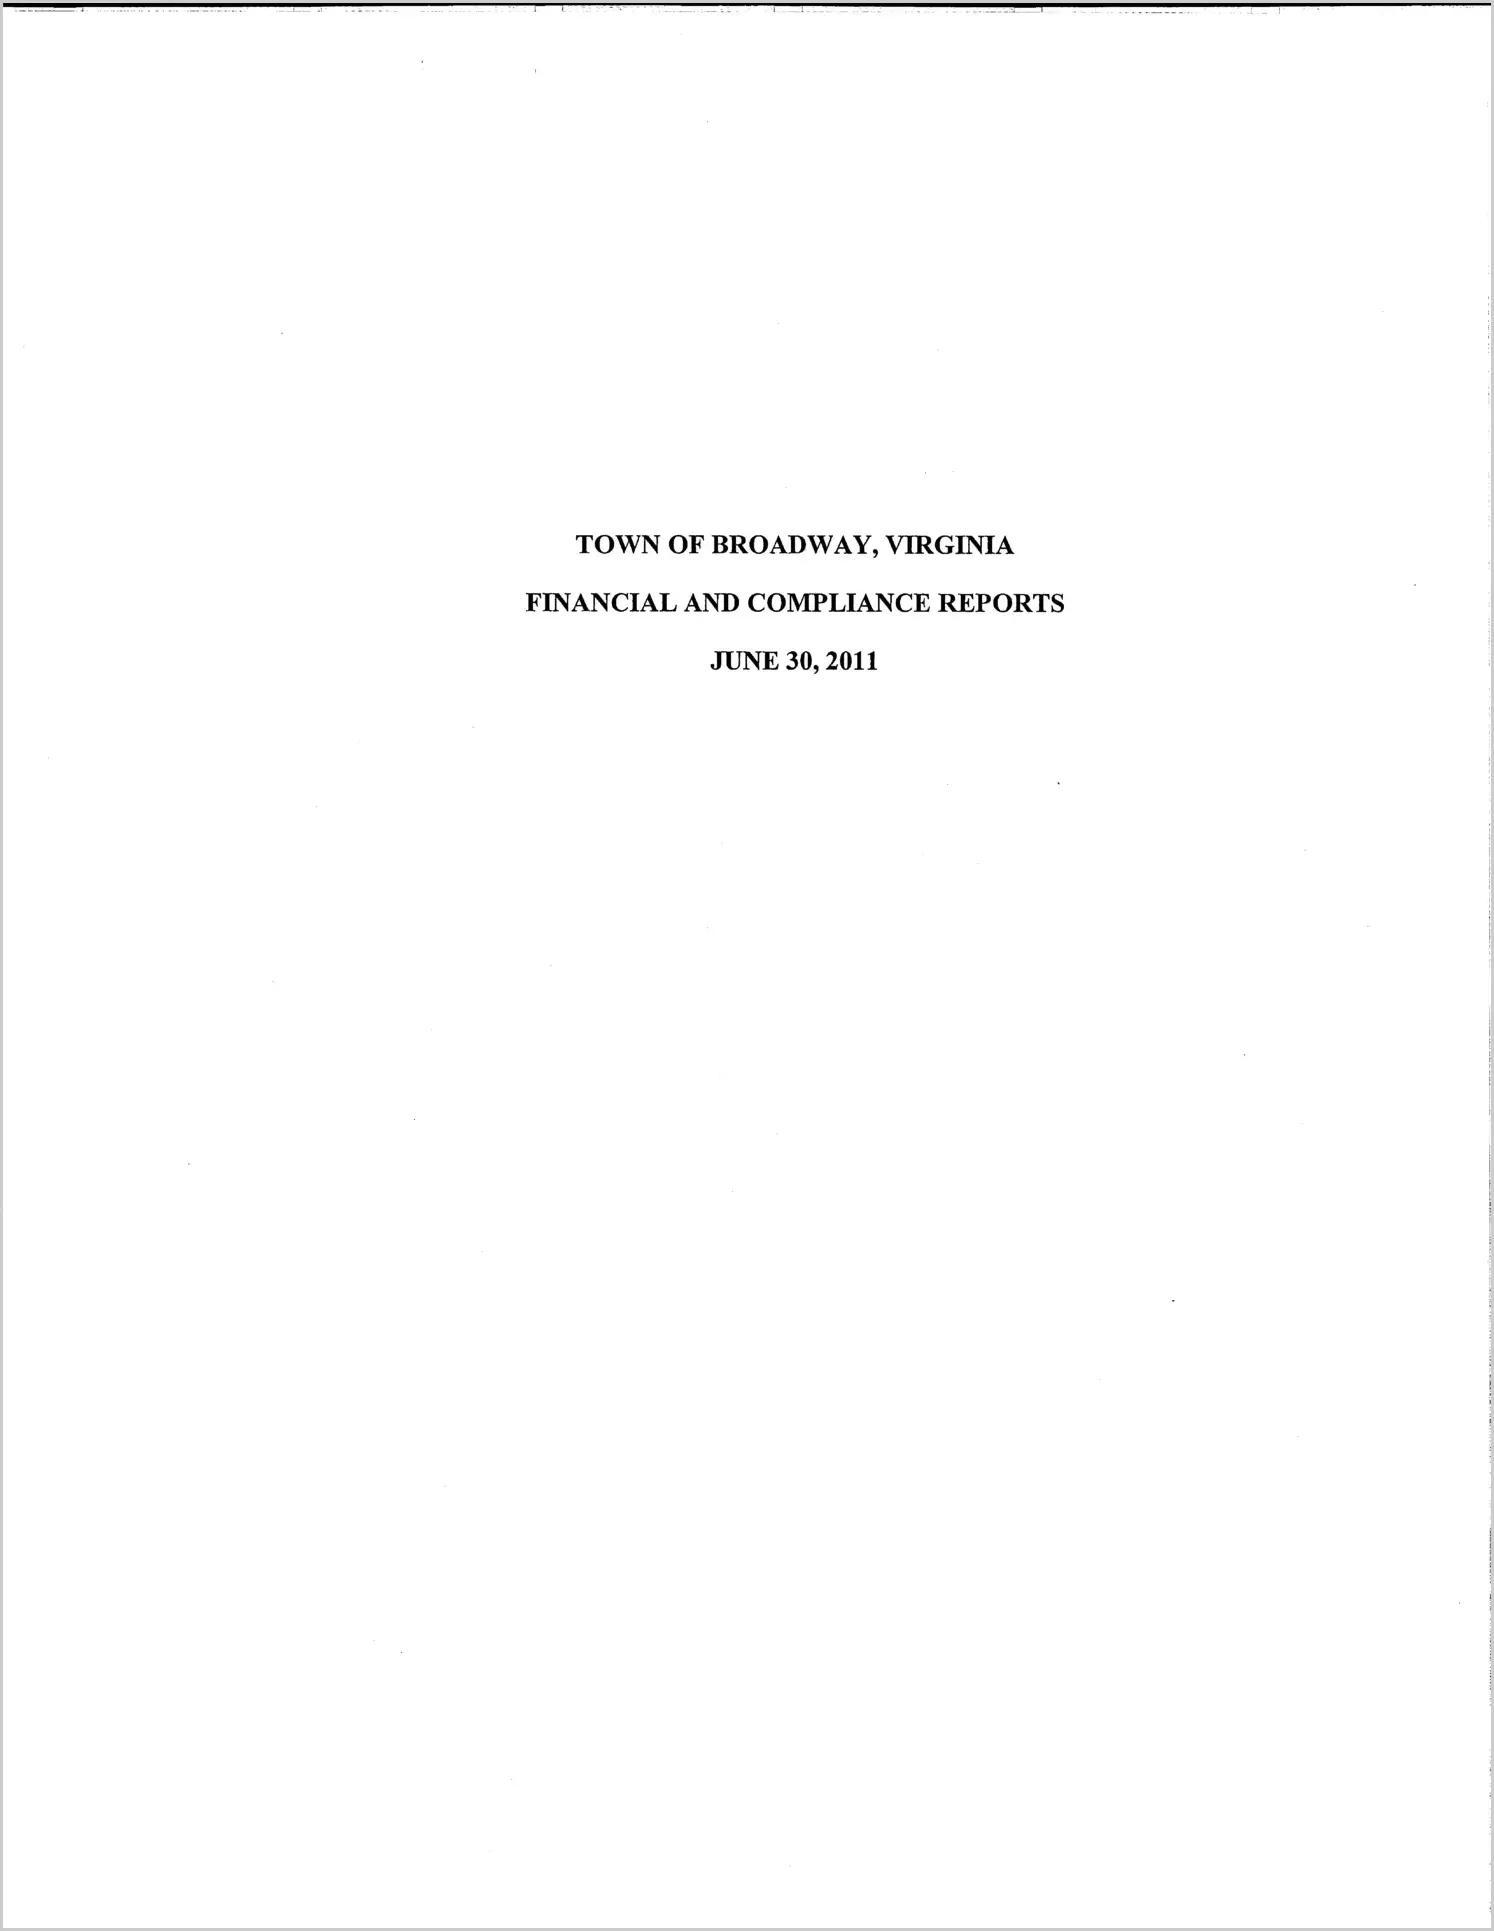 2011 Annual Financial Report for Town of Broadway